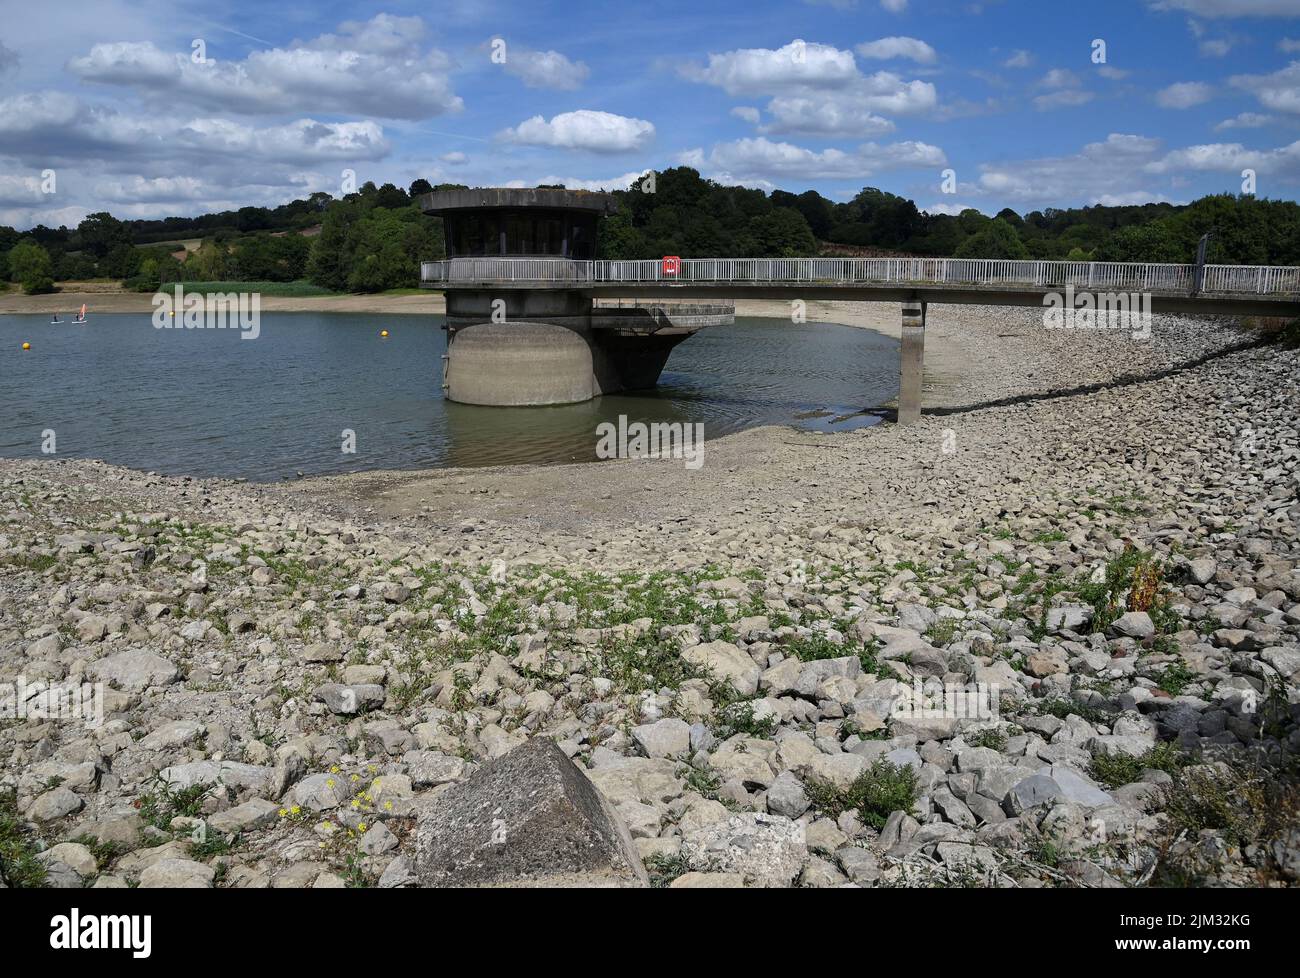 Reduced water levels are seen at Ardingly Reservoir, ahead of regional restrictions over water usage being implemented in the hot and dry weather, Ardingly, southern Britain, August 4, 2022.  REUTERS/Toby Melville Stock Photo